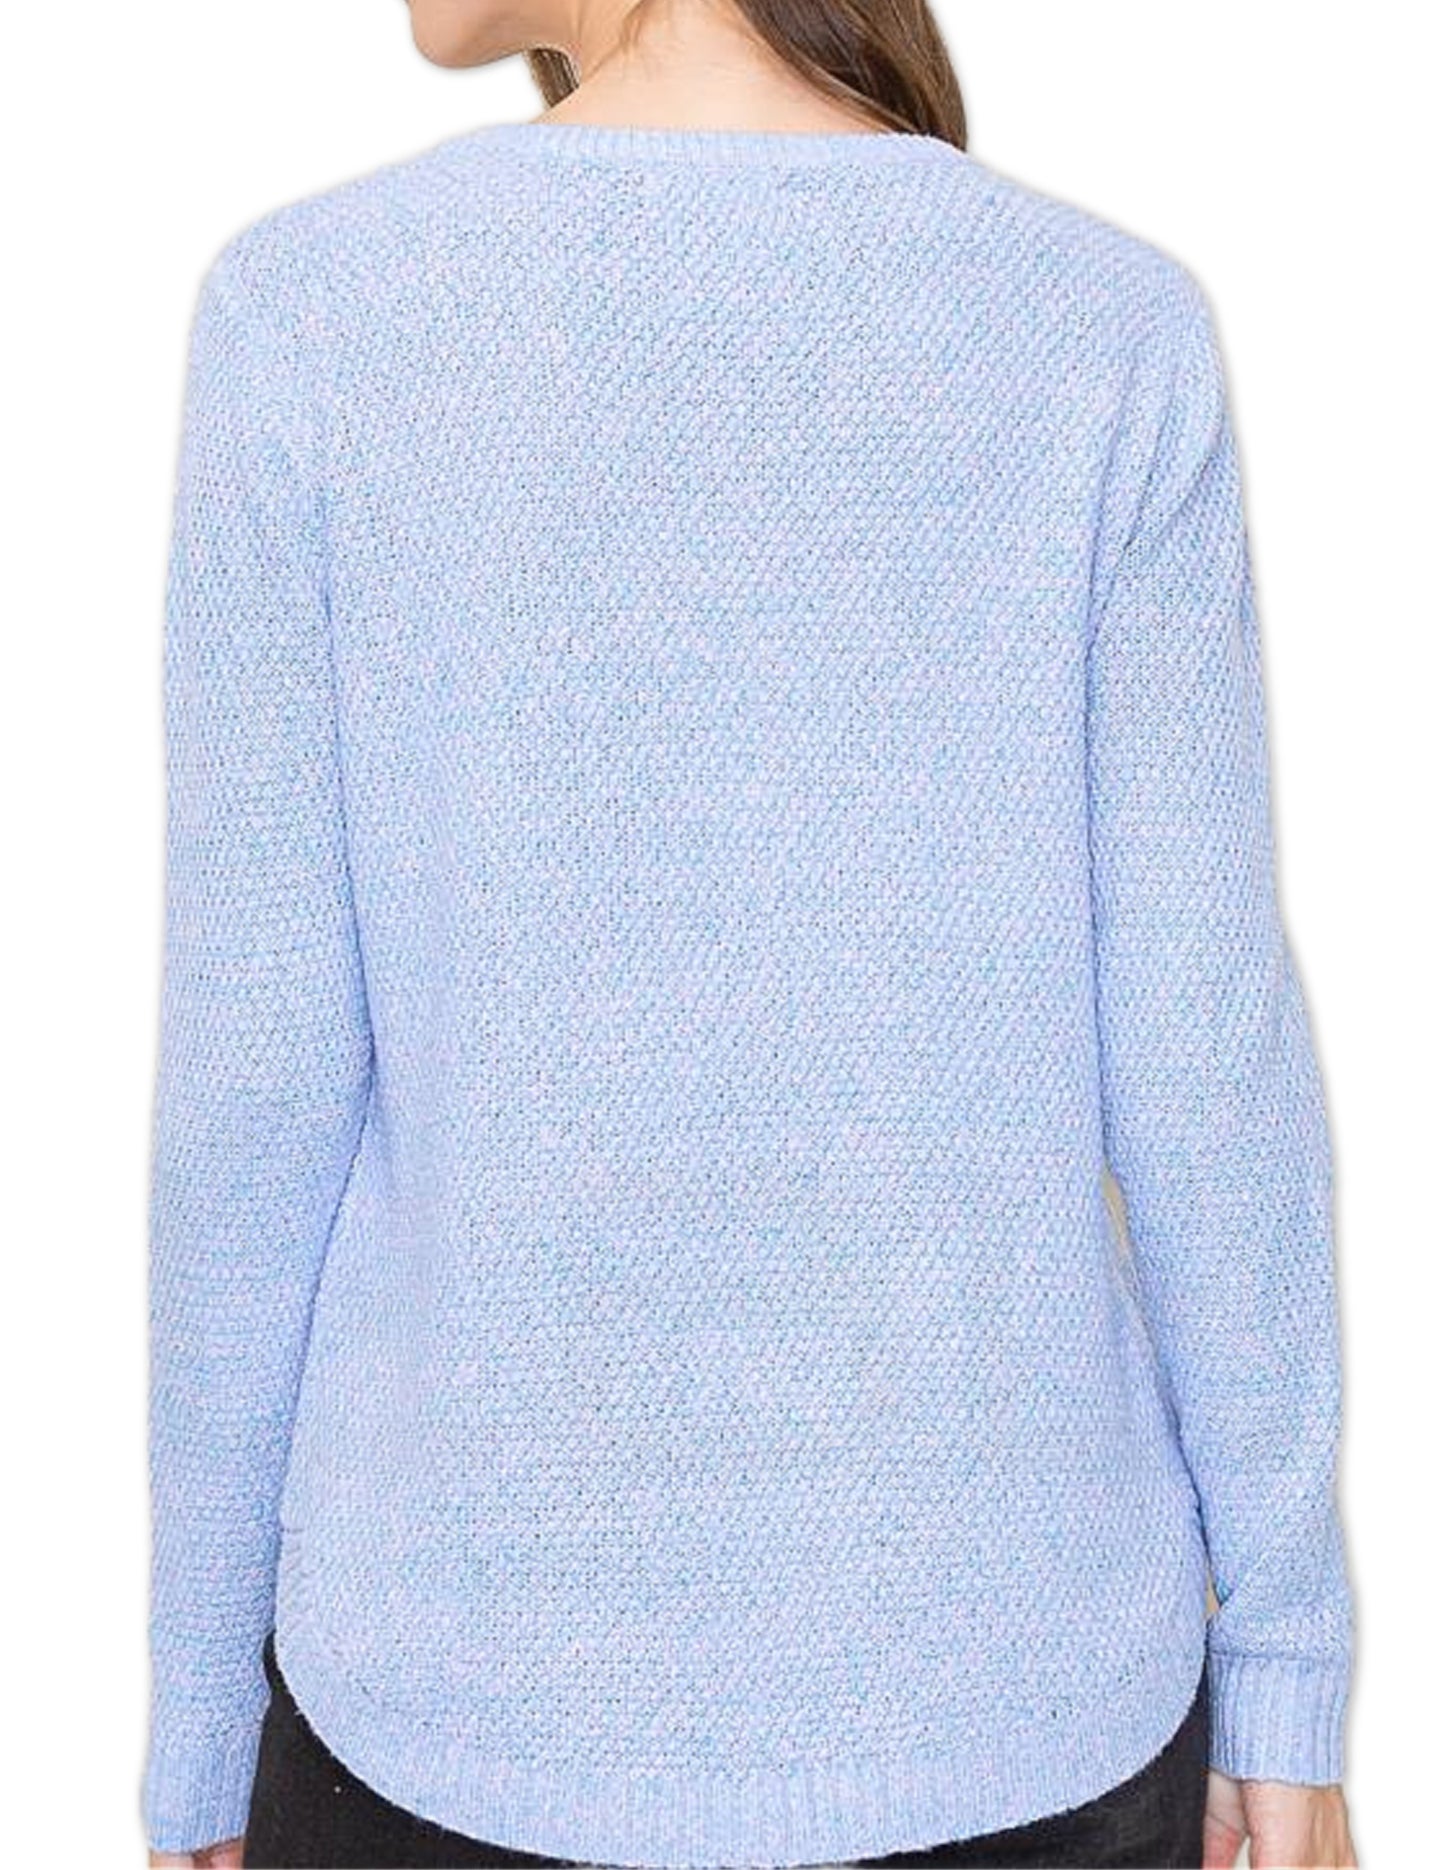 Textured High Low Sweater - Periwinkle